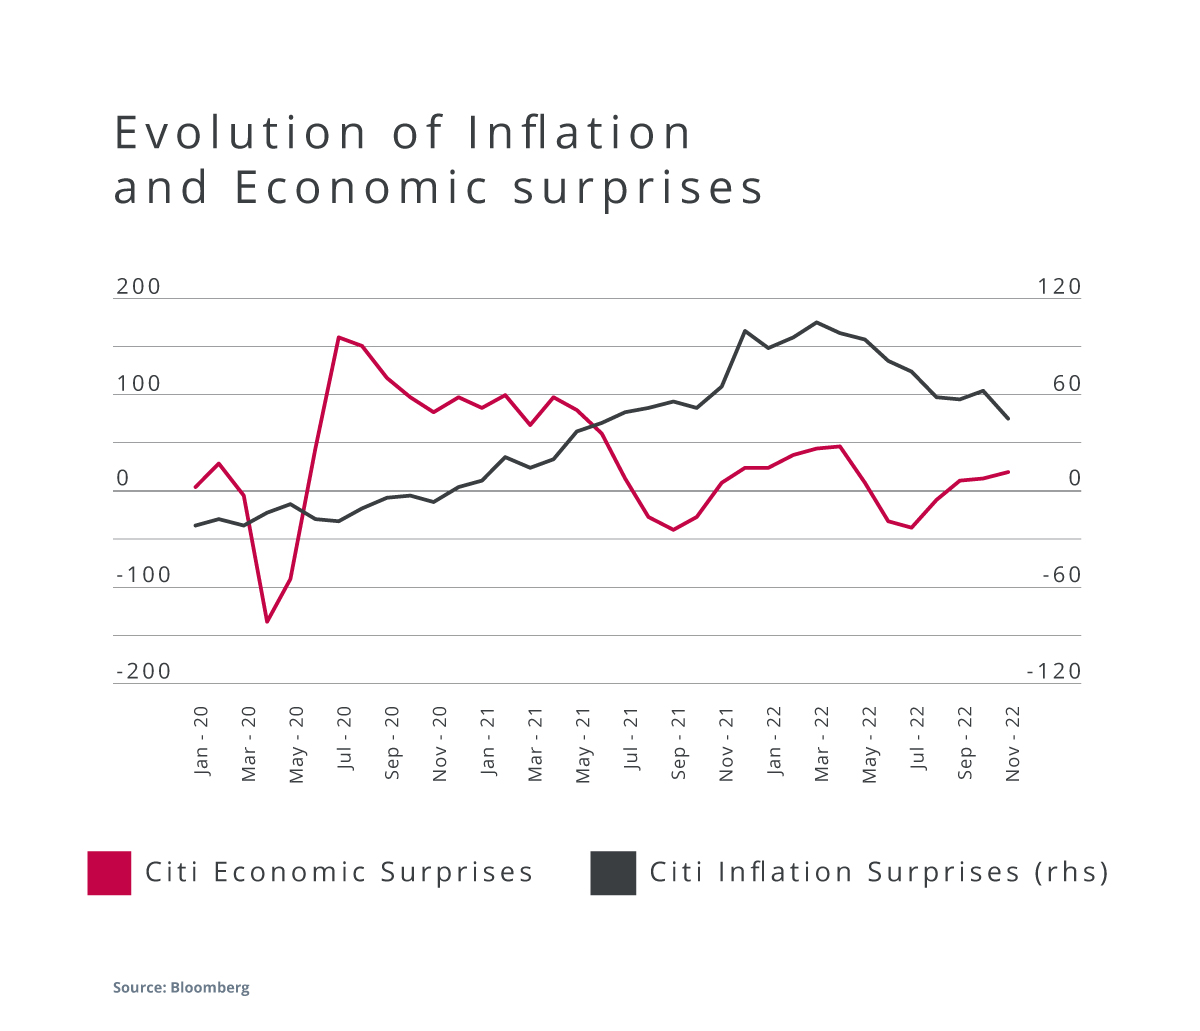 Evolution of Inflation and Economic surprises